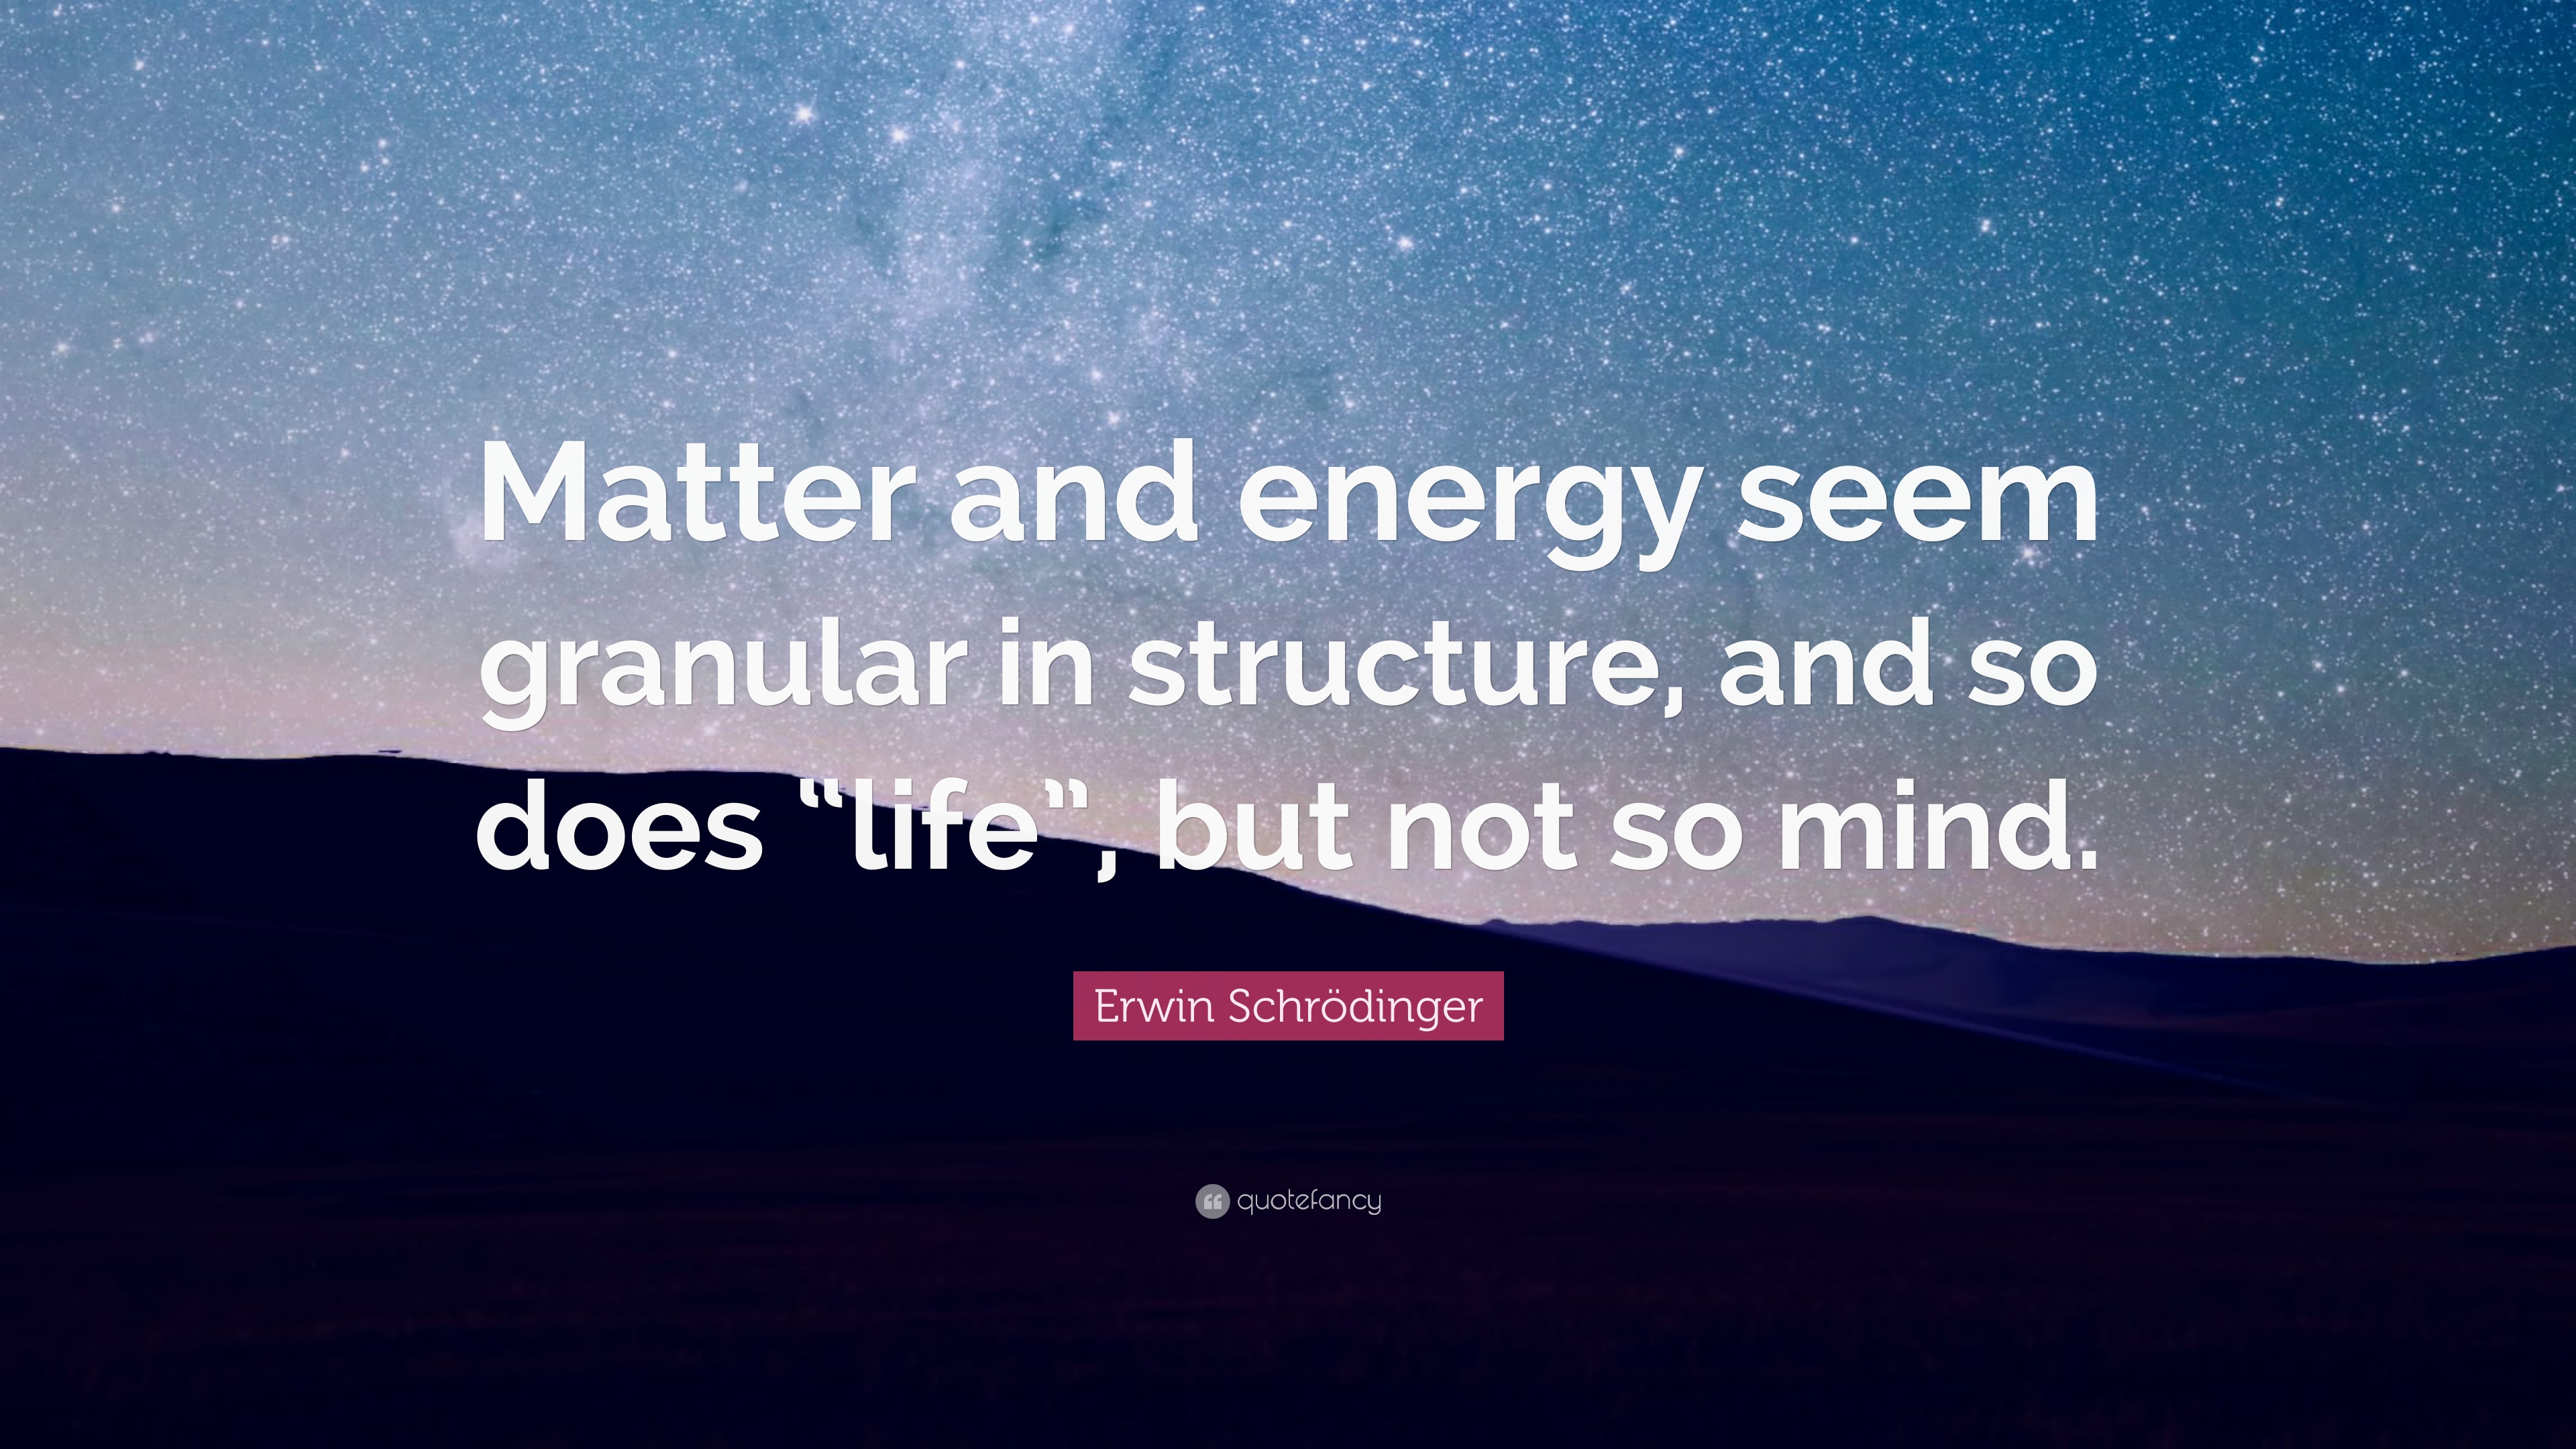 Erwin Schrödinger Quote: “Matter and energy seem granular in structure, and so does “life”, but not